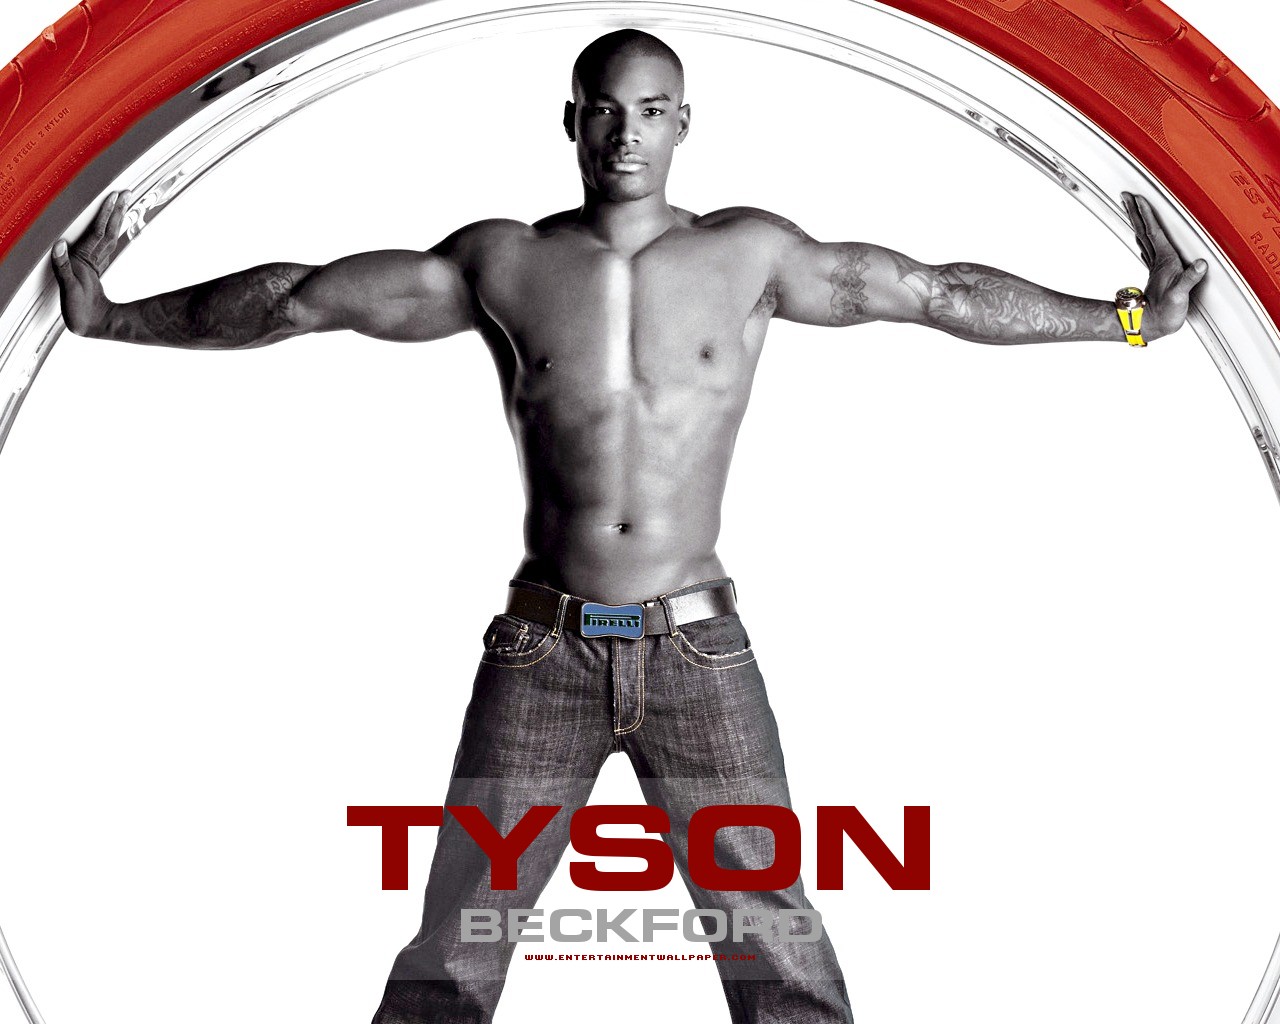 +++ KING OF DECADE [1990-1999] - TOP 30 - VOTE 4 TOP 20 Tyson_beckford02